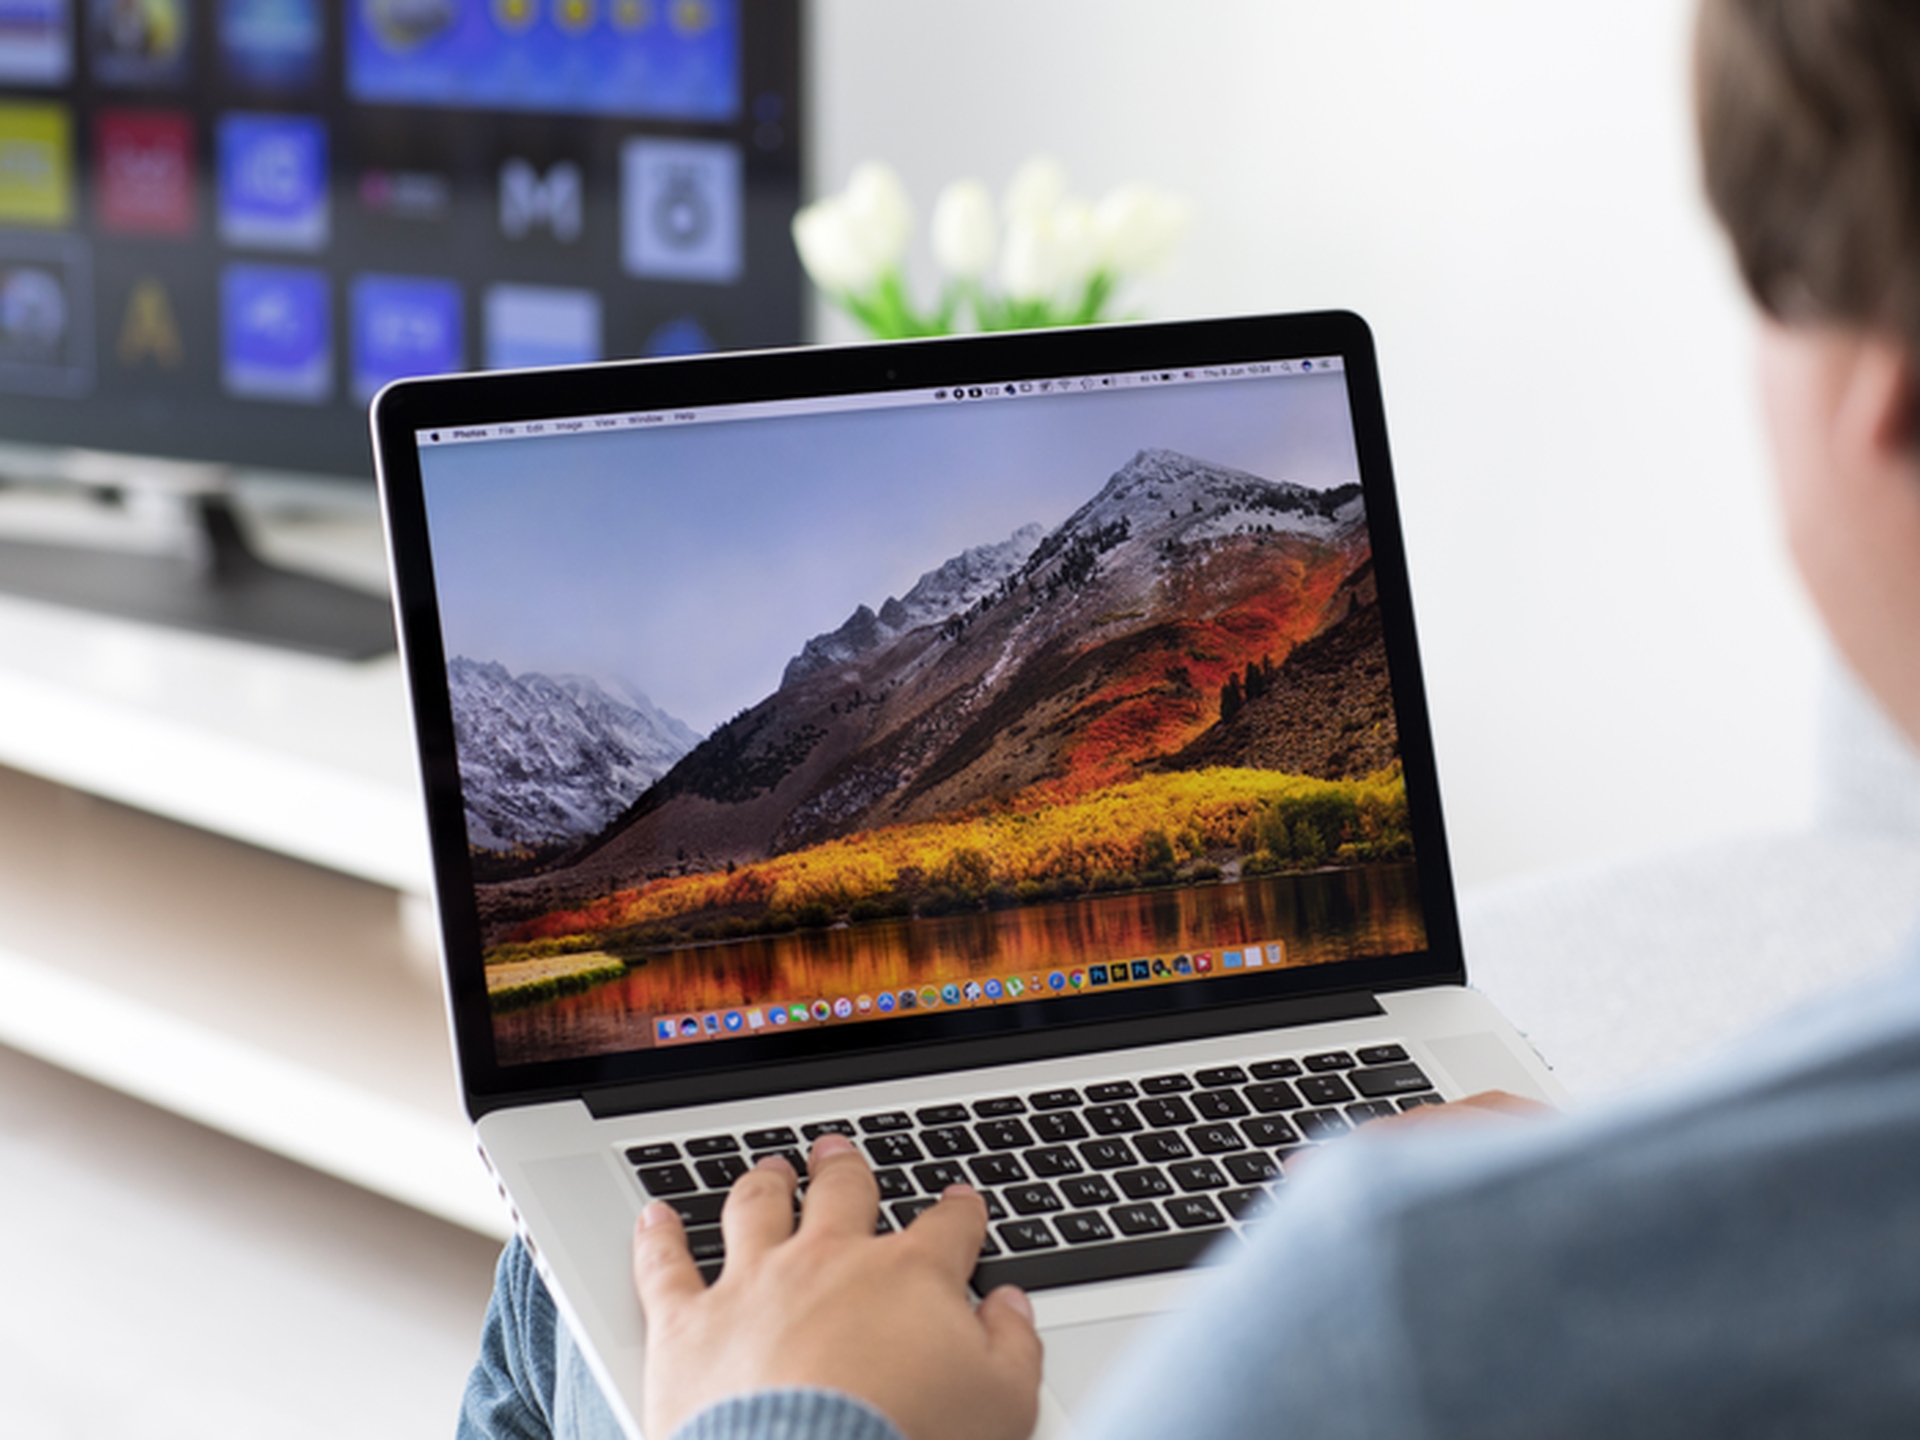 In this article, we are going to be covering how to zoom out on a Mac in various ways, so you can find one that fits your needs and utilize it.